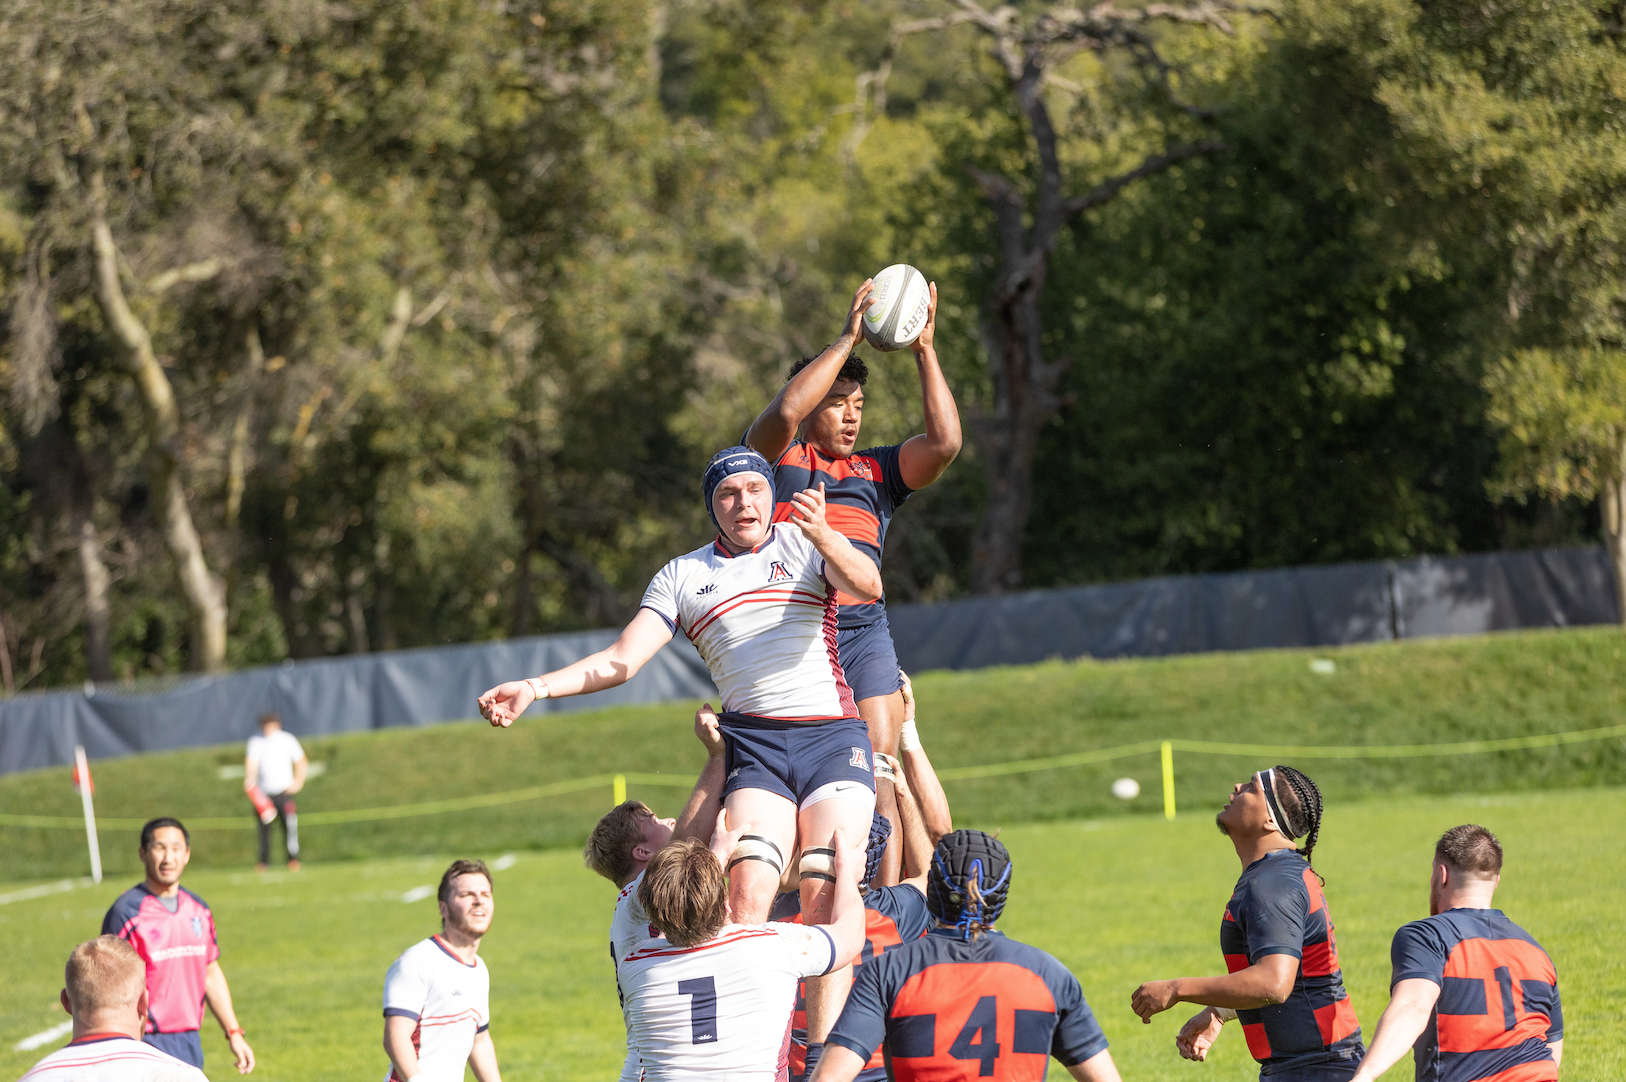 Men's Rugby player catches the ball from a line out